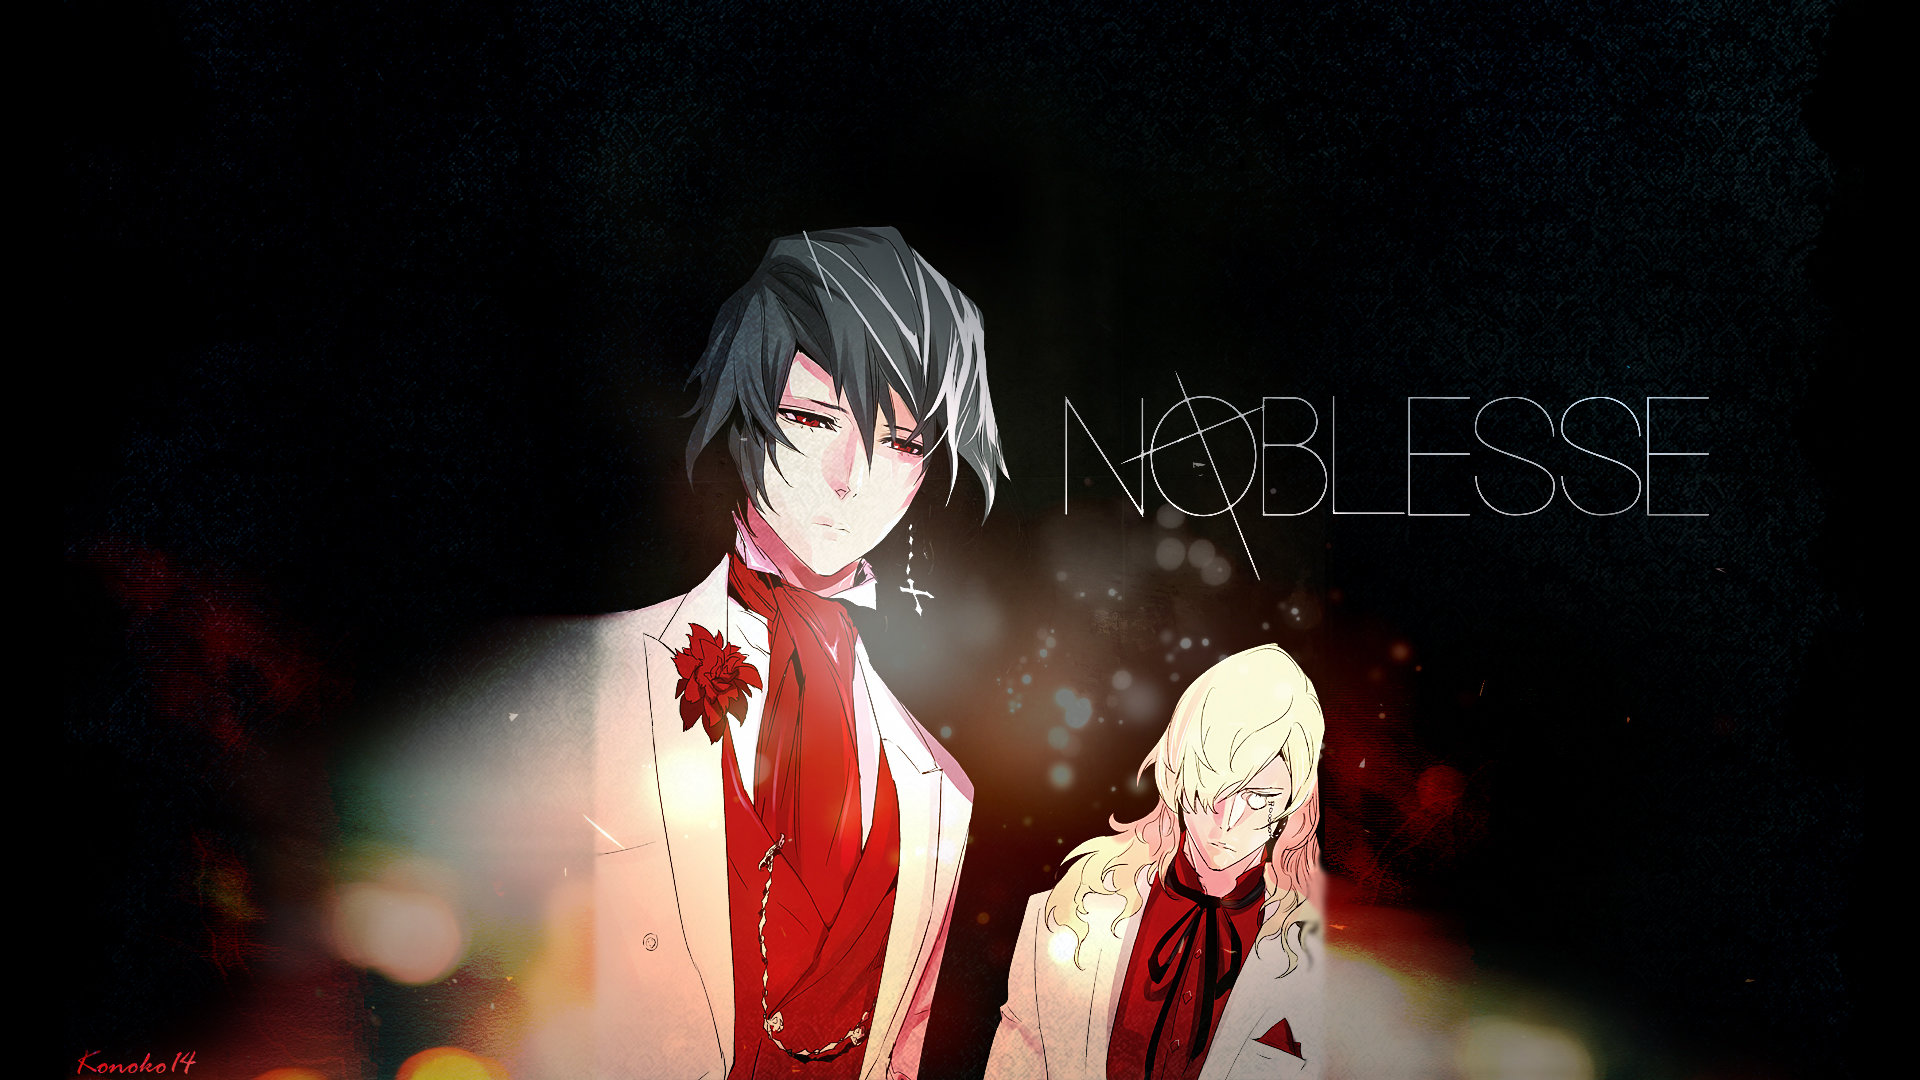 High resolution Noblesse full hd 1920x1080 background ID:105619 for desktop